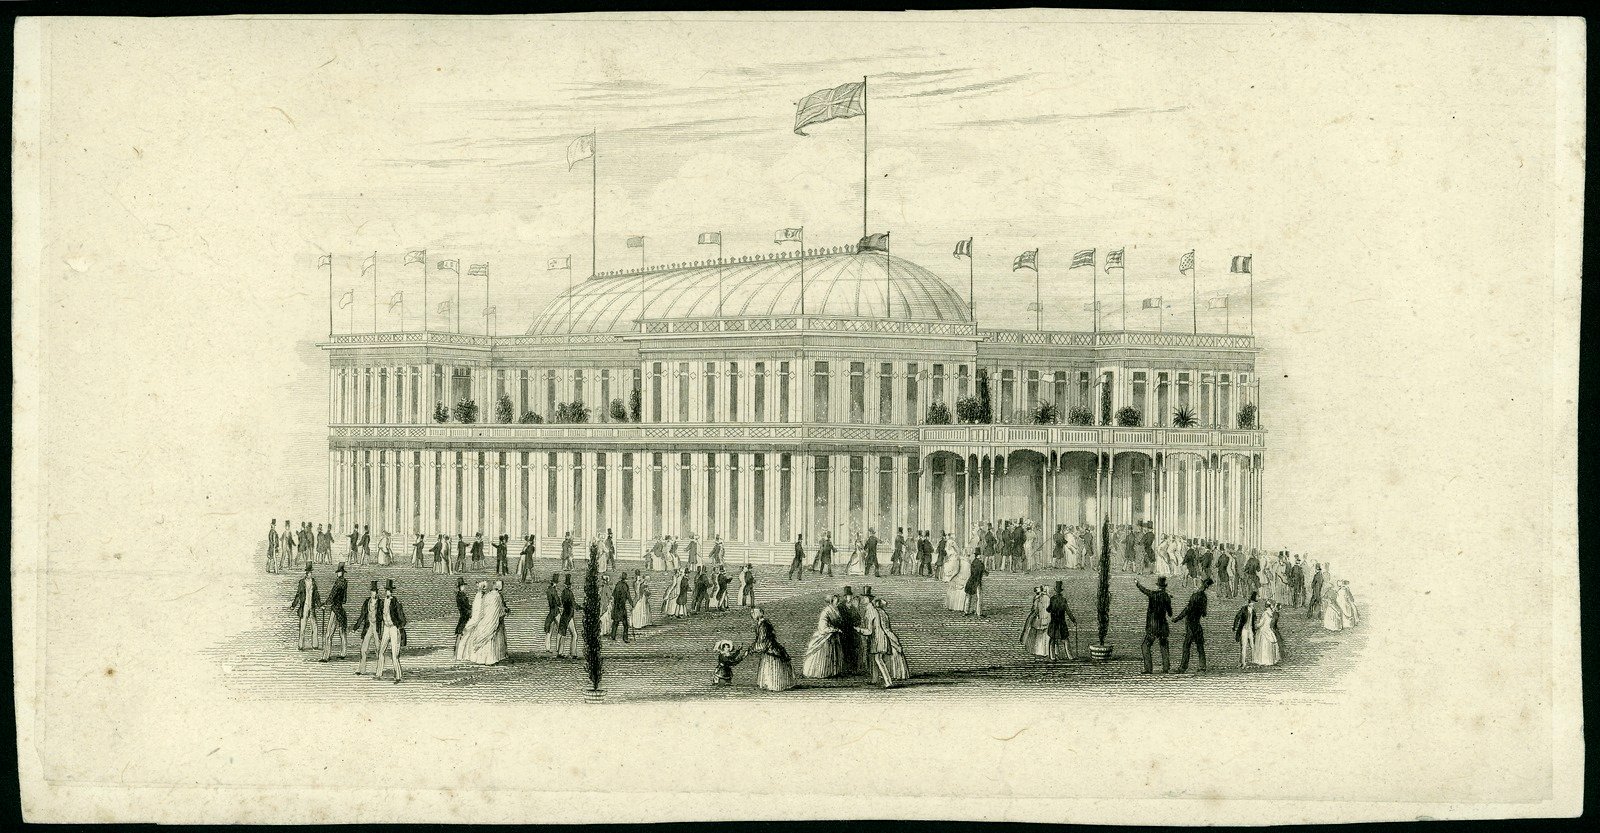 Images of Melbourne's first exhibition building